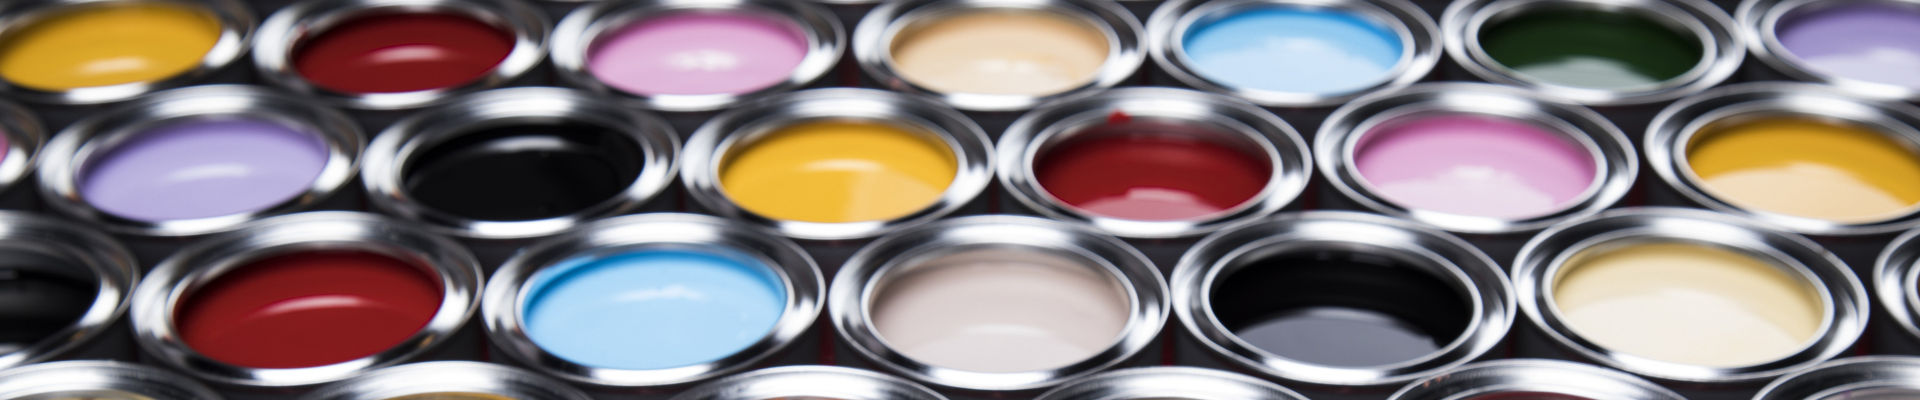 Large array of open paint cans containing various colors of paint